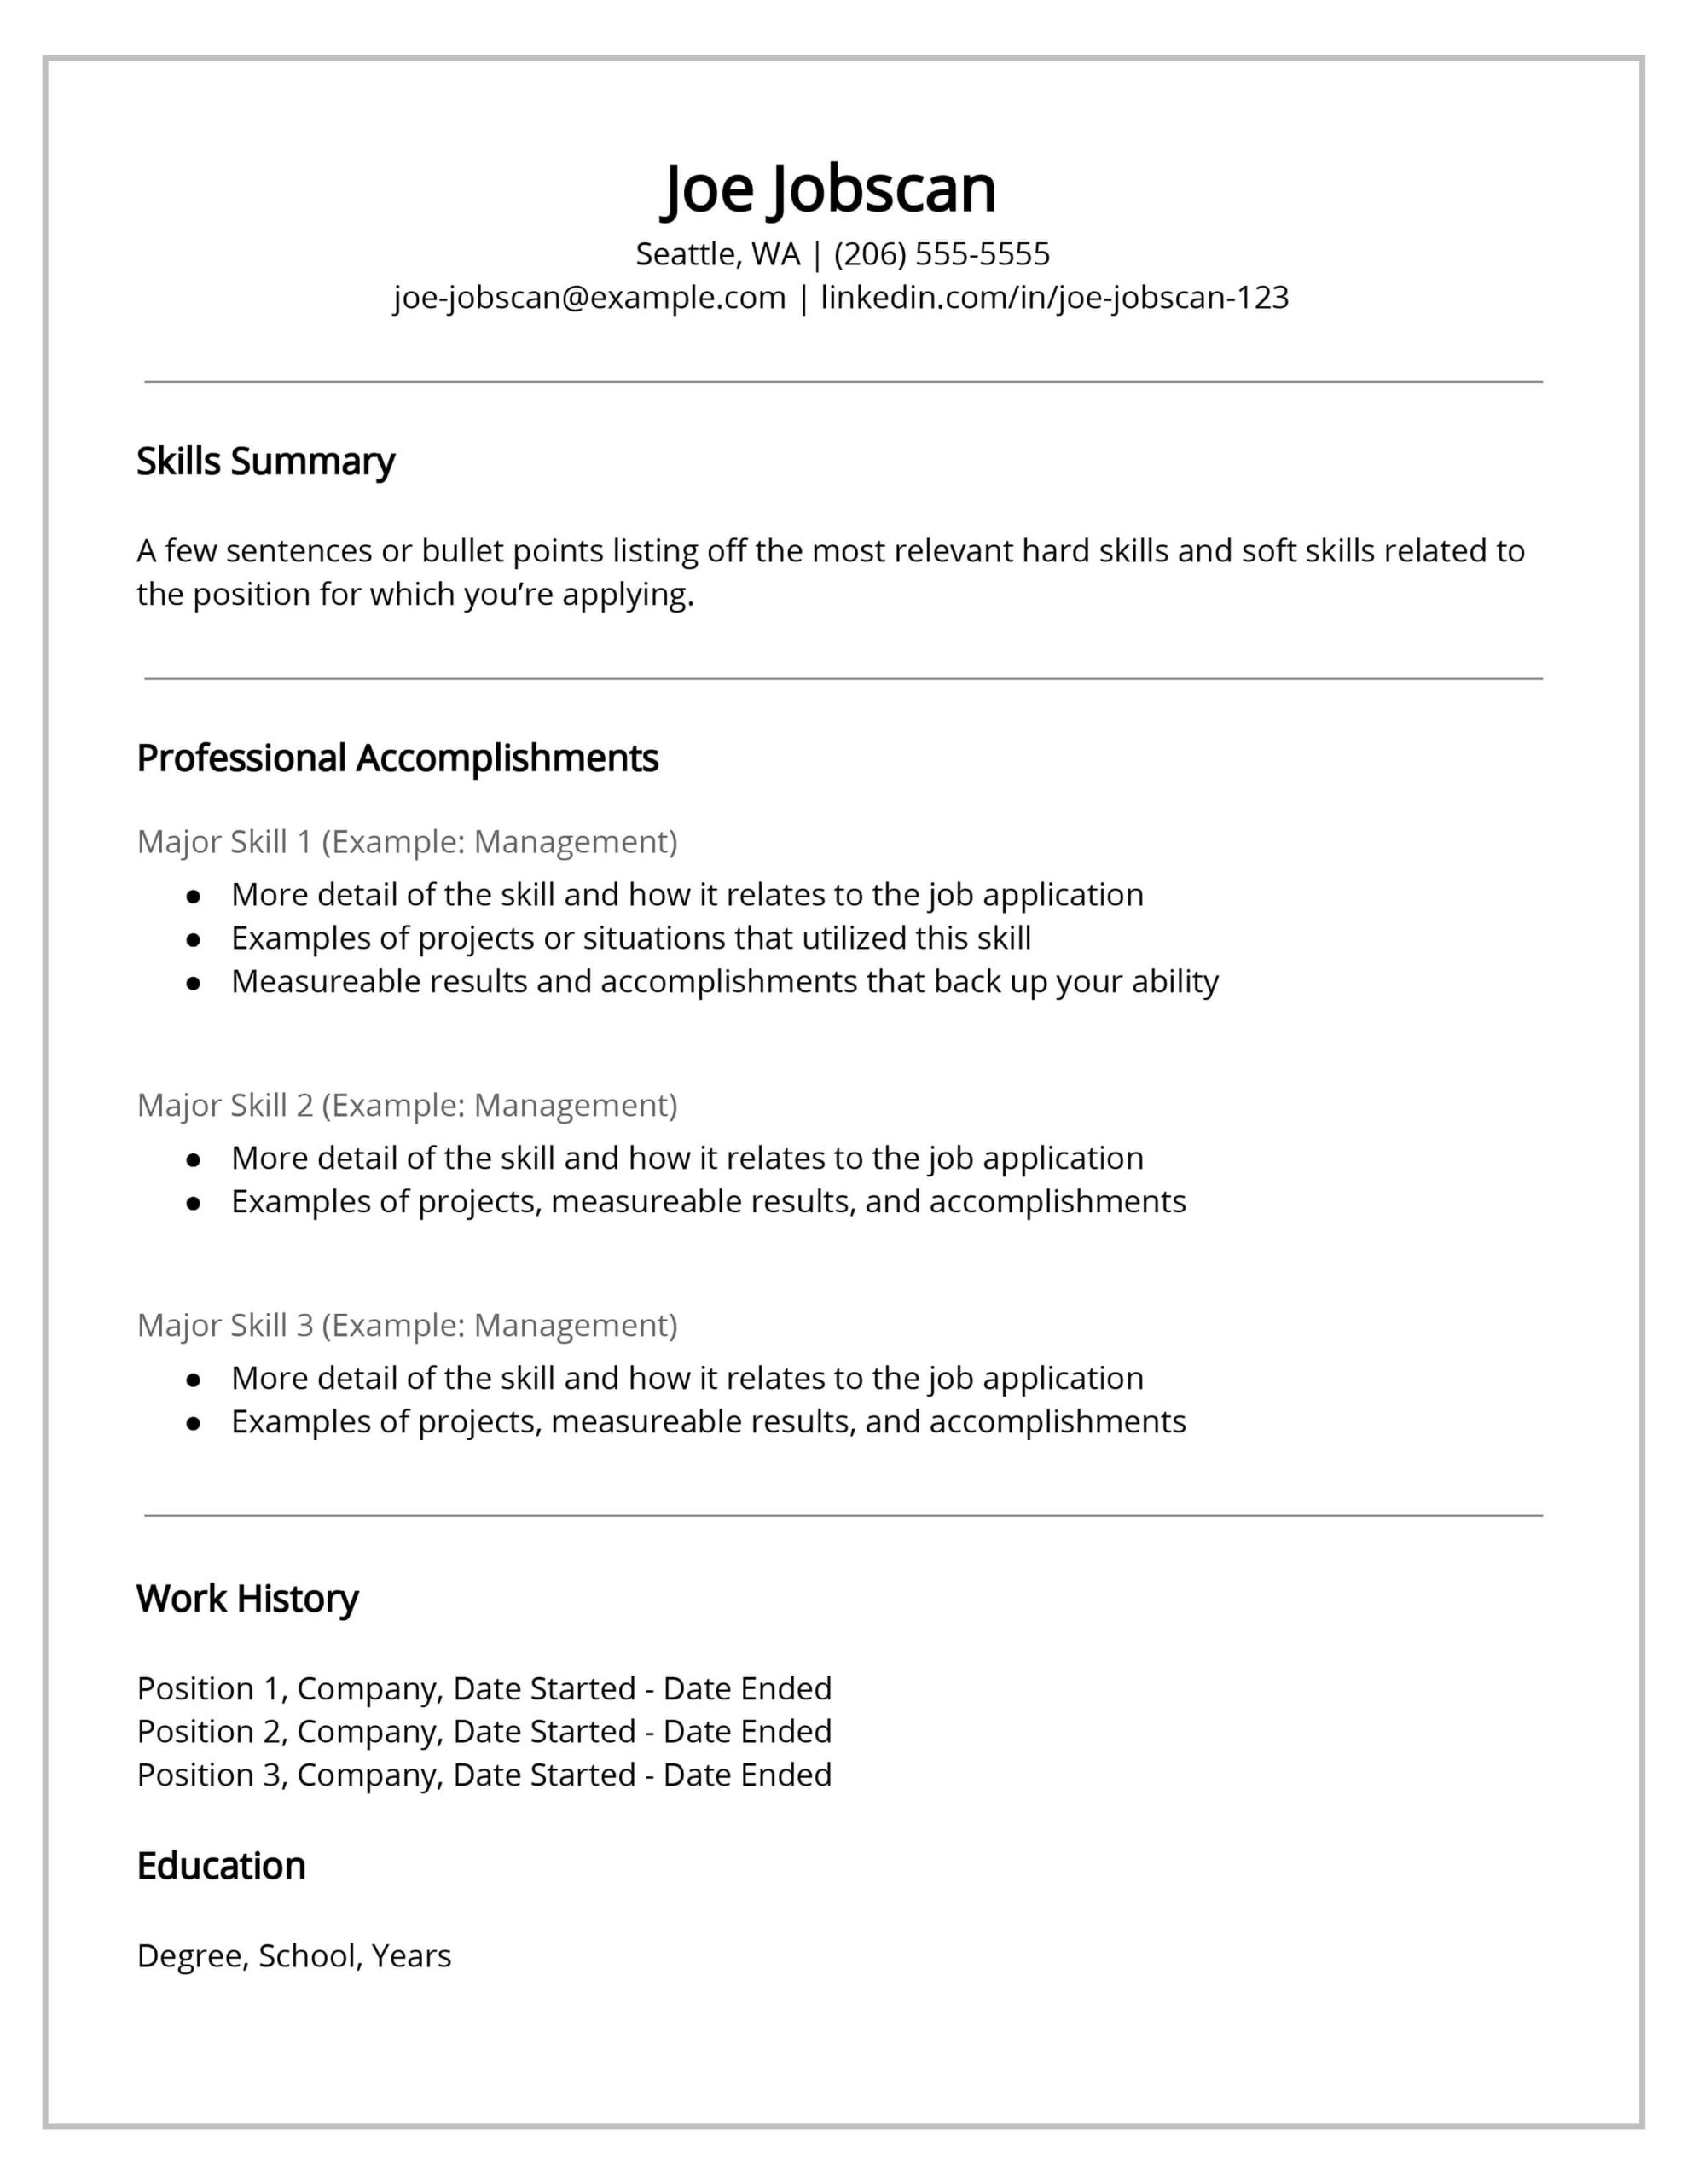 Sample Functional Resume with No Work Experience Recruiters Hate the Functional Resume formatâdo This Instead